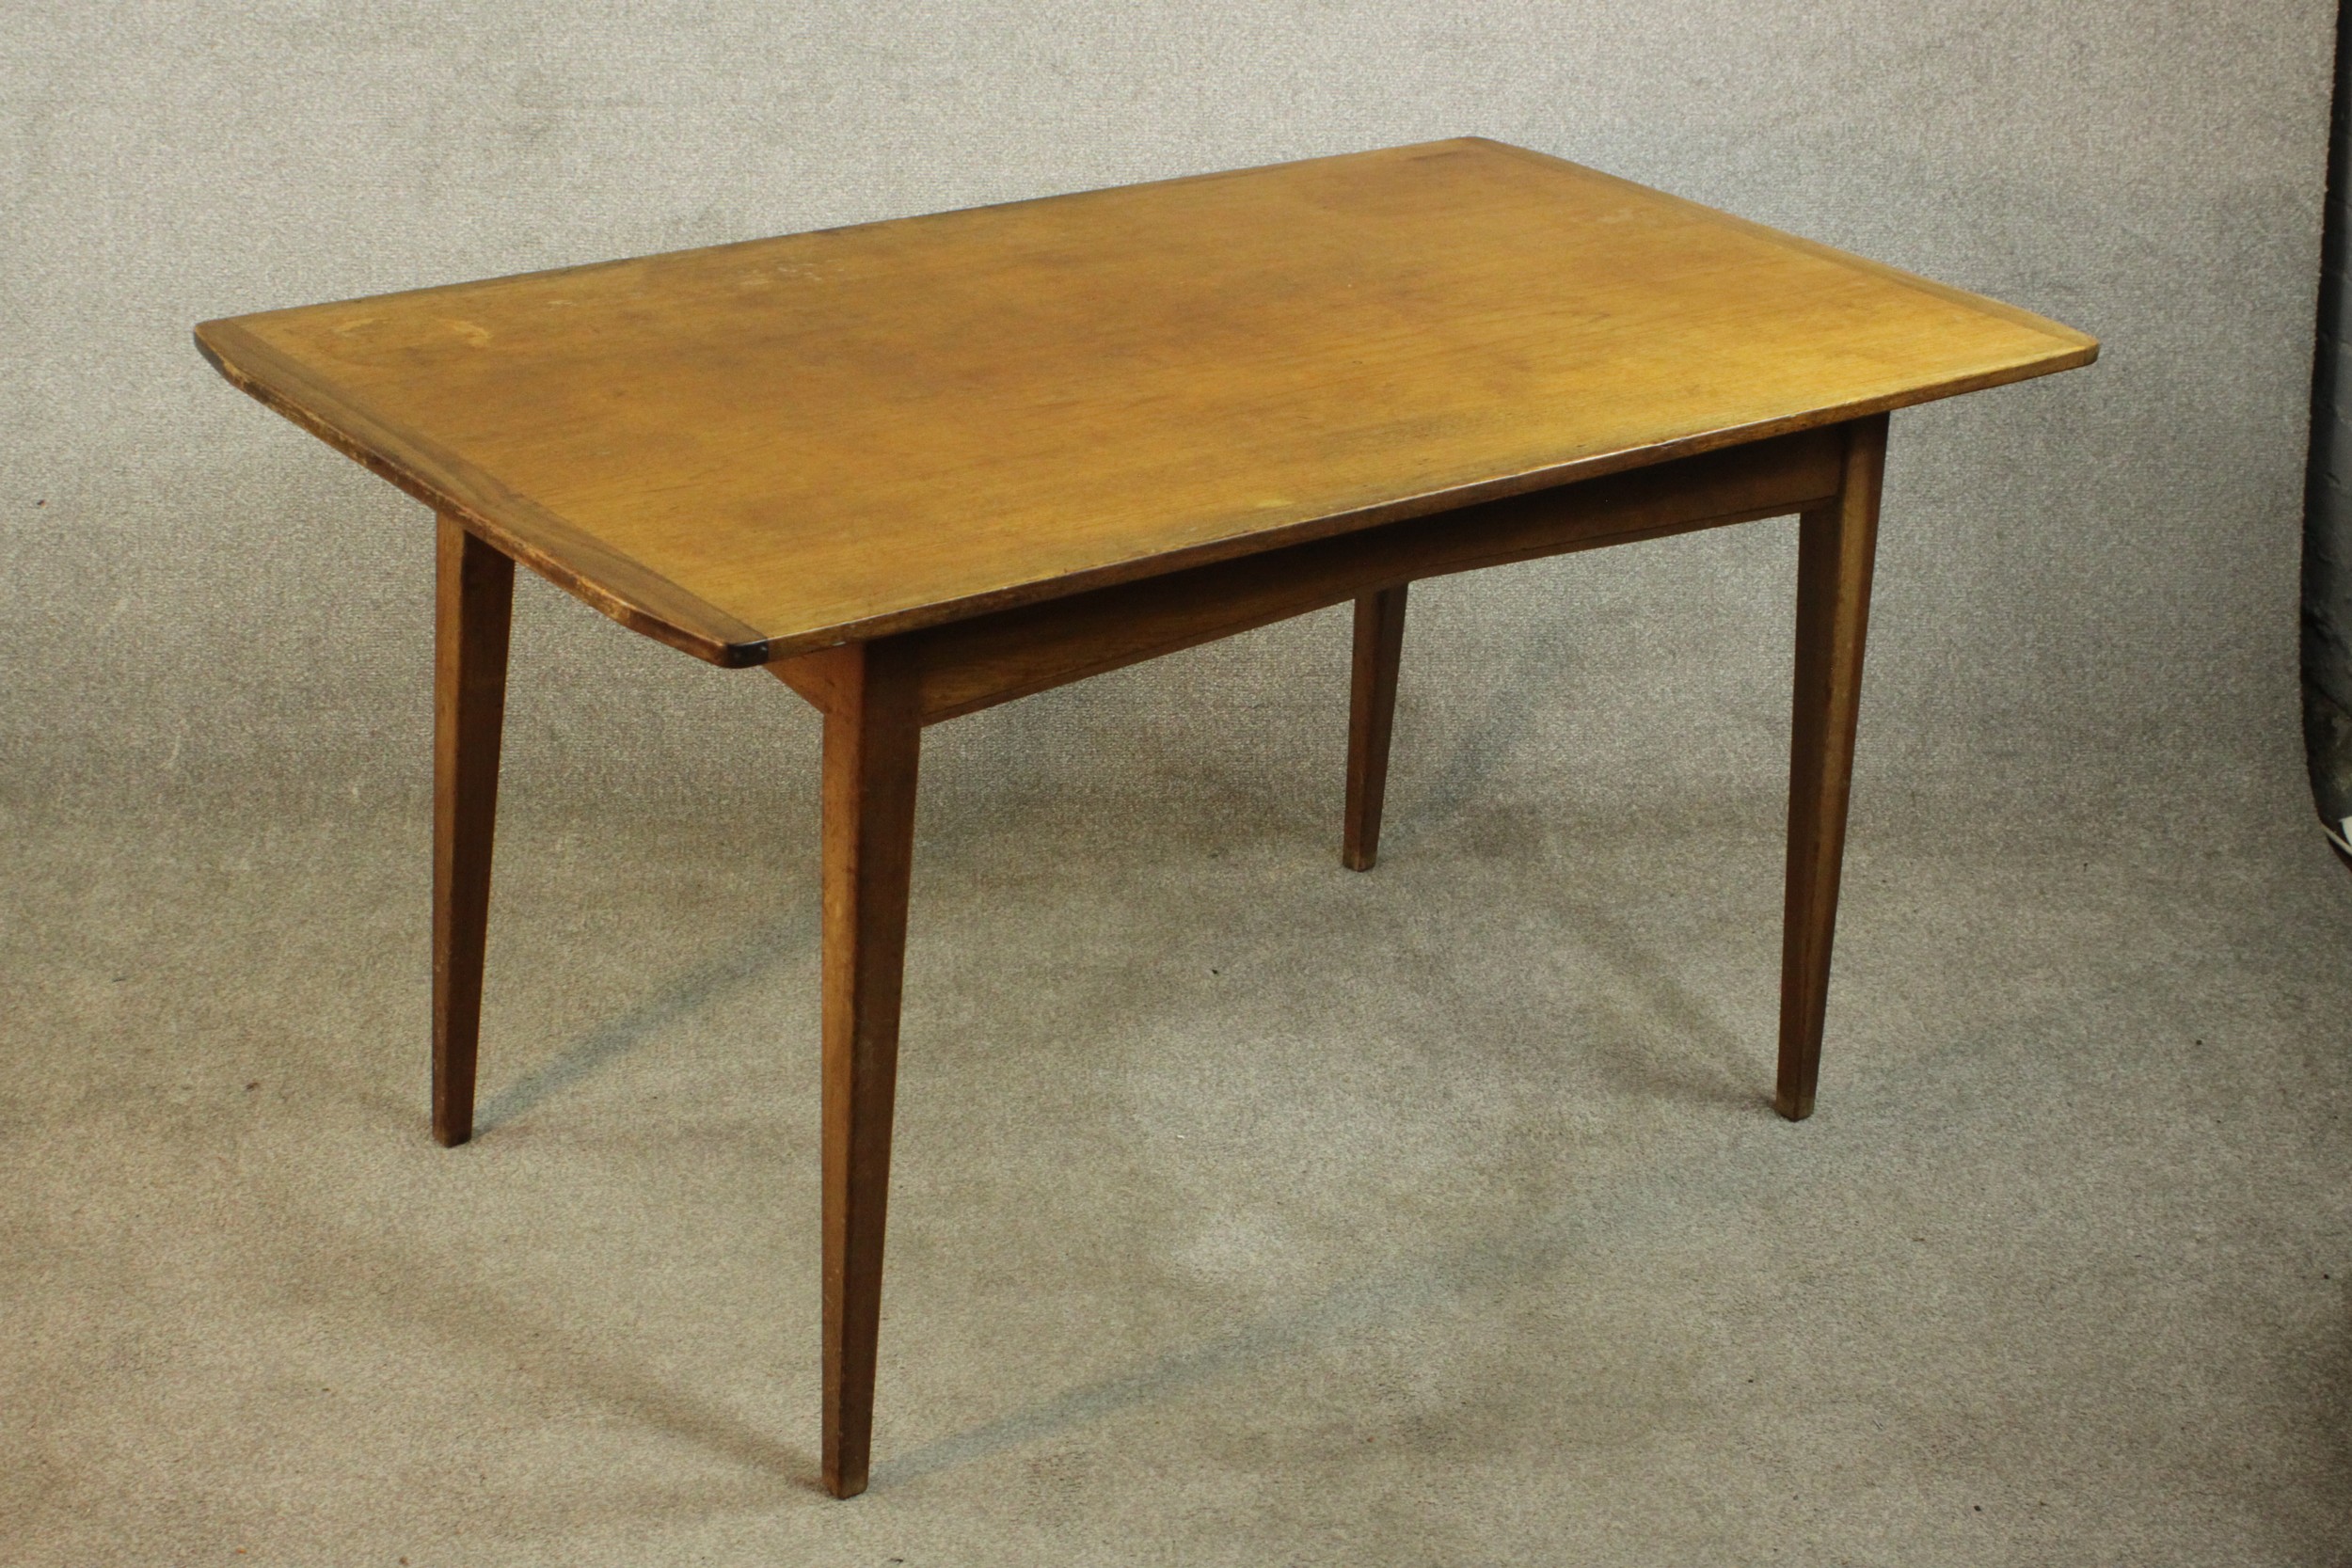 A circa 1960's teak dining table by Storys of Kensington, the rectangular top with cleated ends, - Image 3 of 5